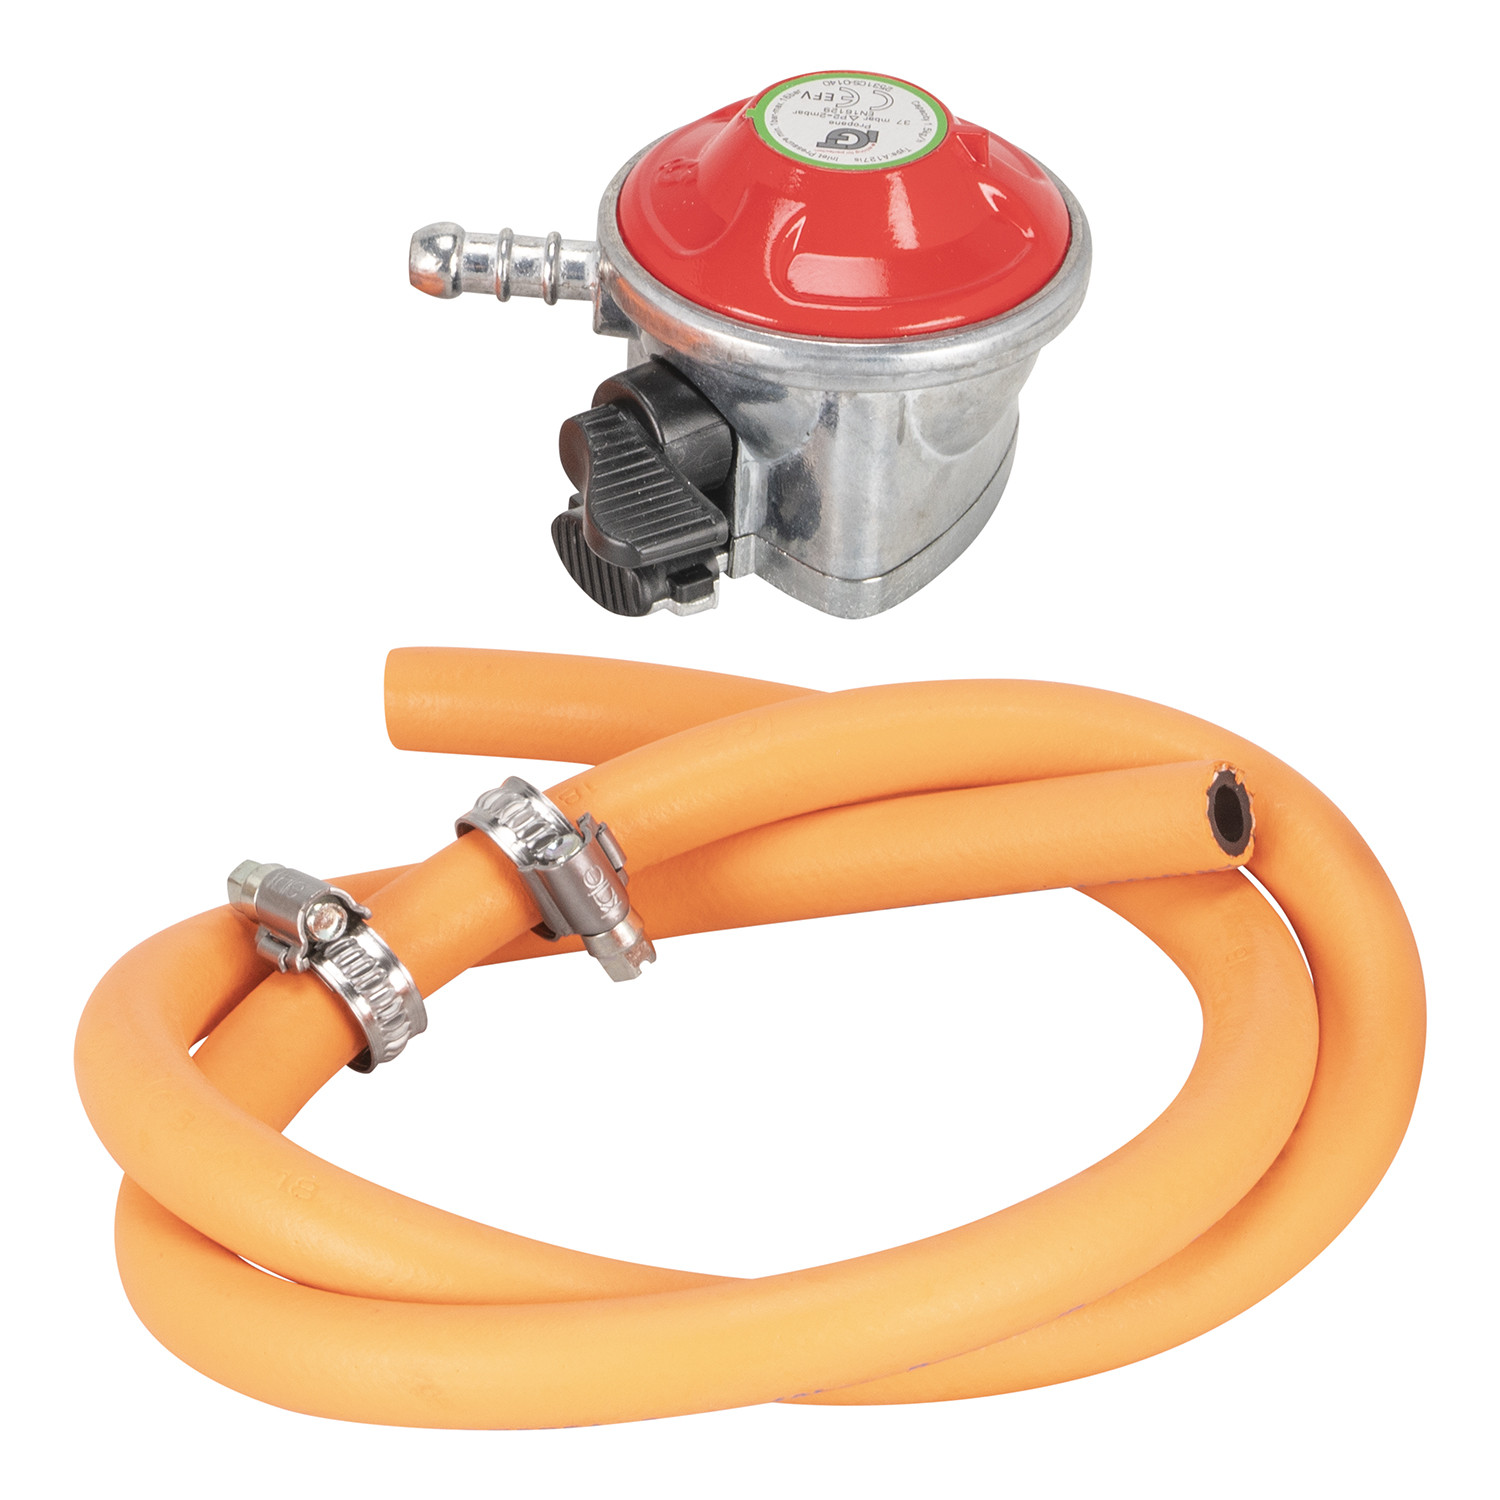 Snap-On Propane Regulator With Hose and Clips - Orange Image